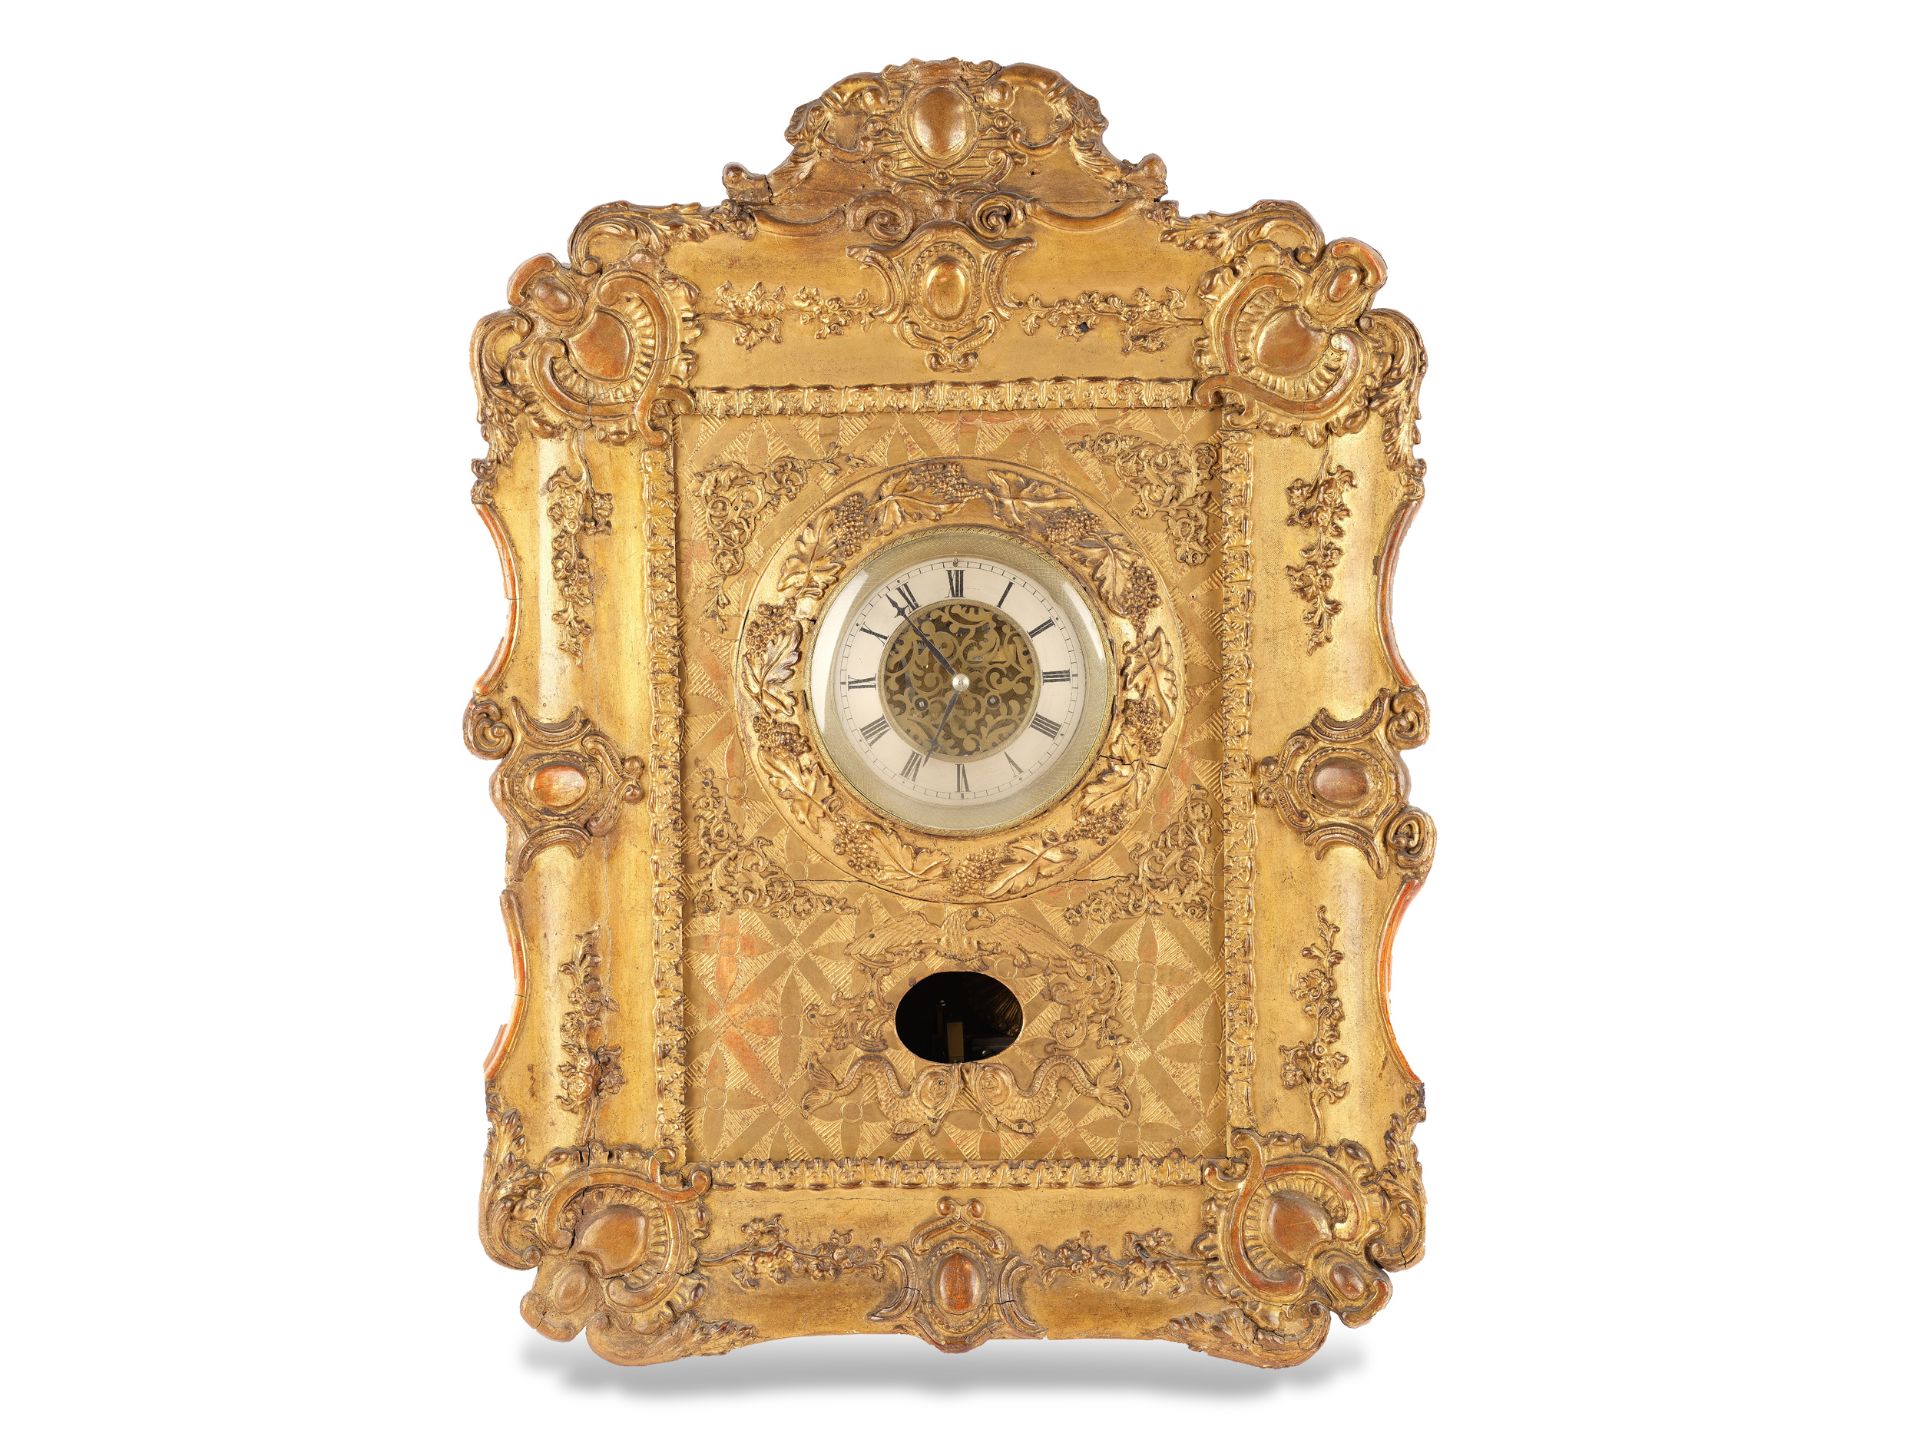 Biedermeier frame clock with musical mechanism, Around 1840/50, Wooden case decorated with relief